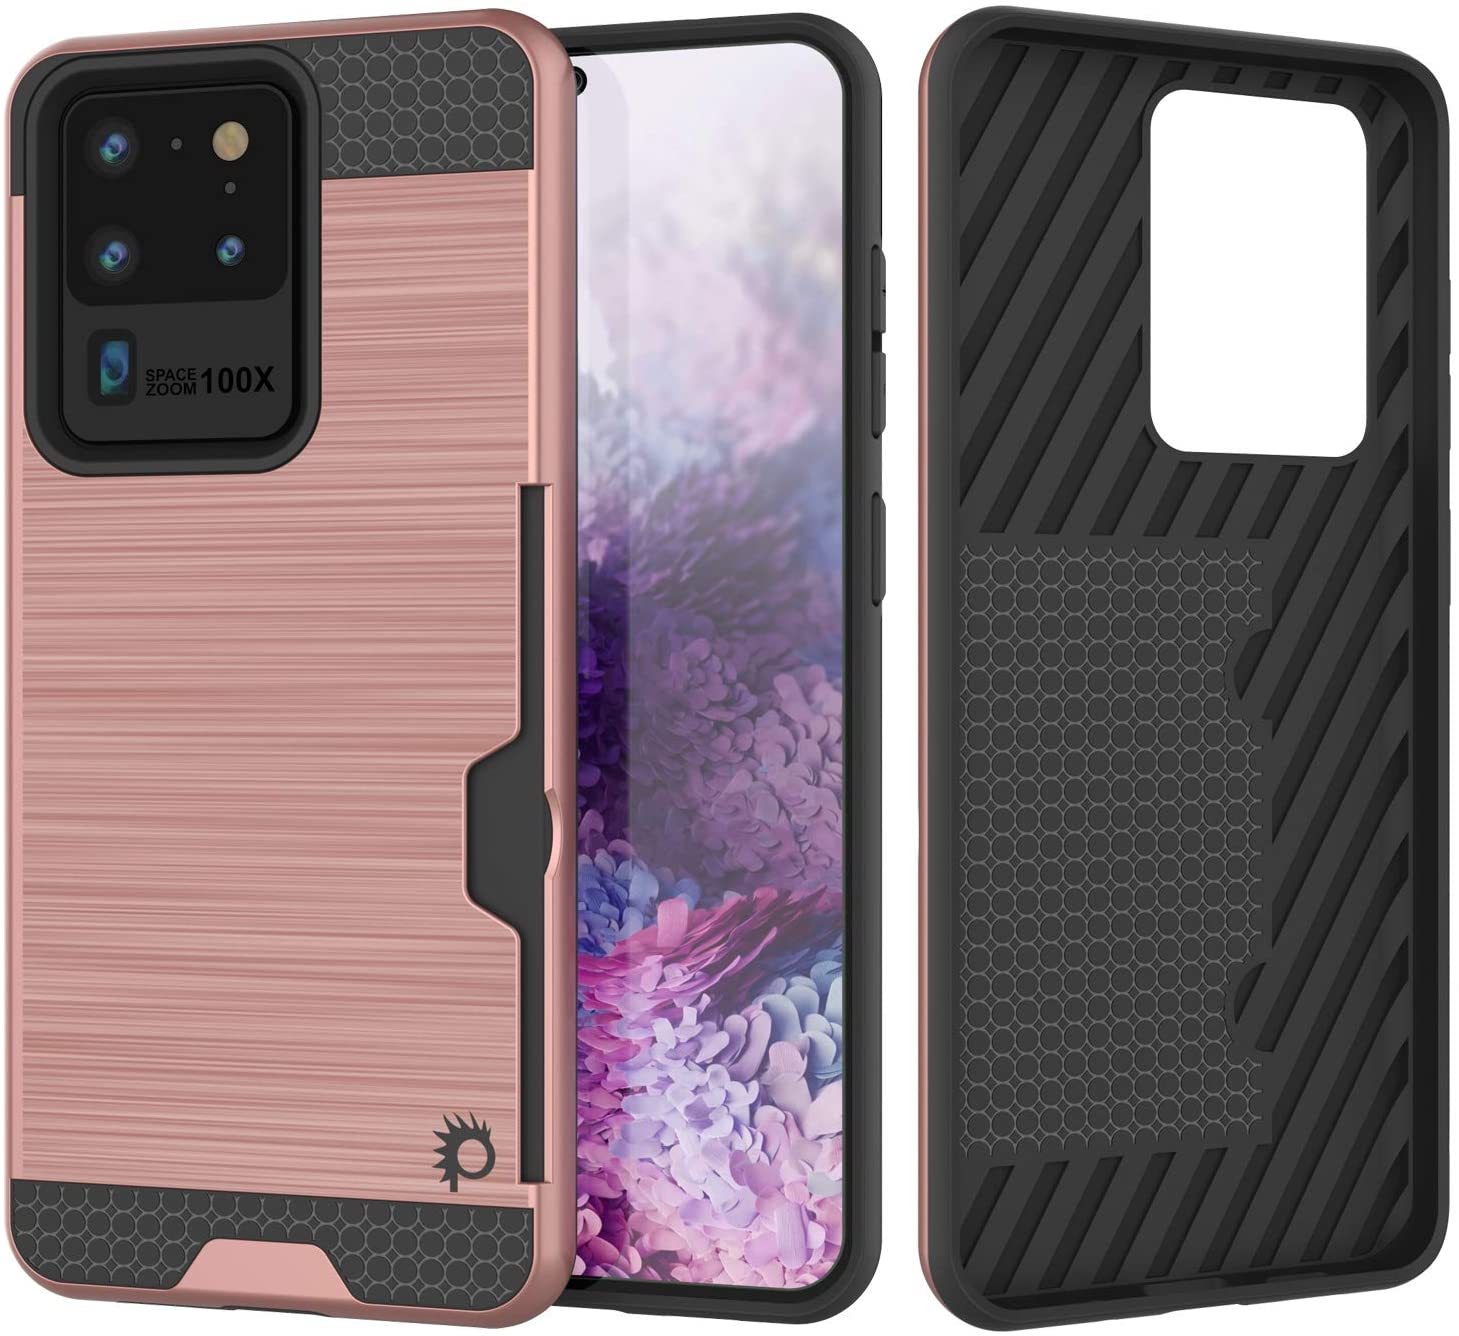 Galaxy S20 Ultra Case, PUNKcase [SLOT Series] [Slim Fit] Dual-Layer Armor Cover w/Integrated Anti-Shock System, Credit Card Slot [Rose Gold]